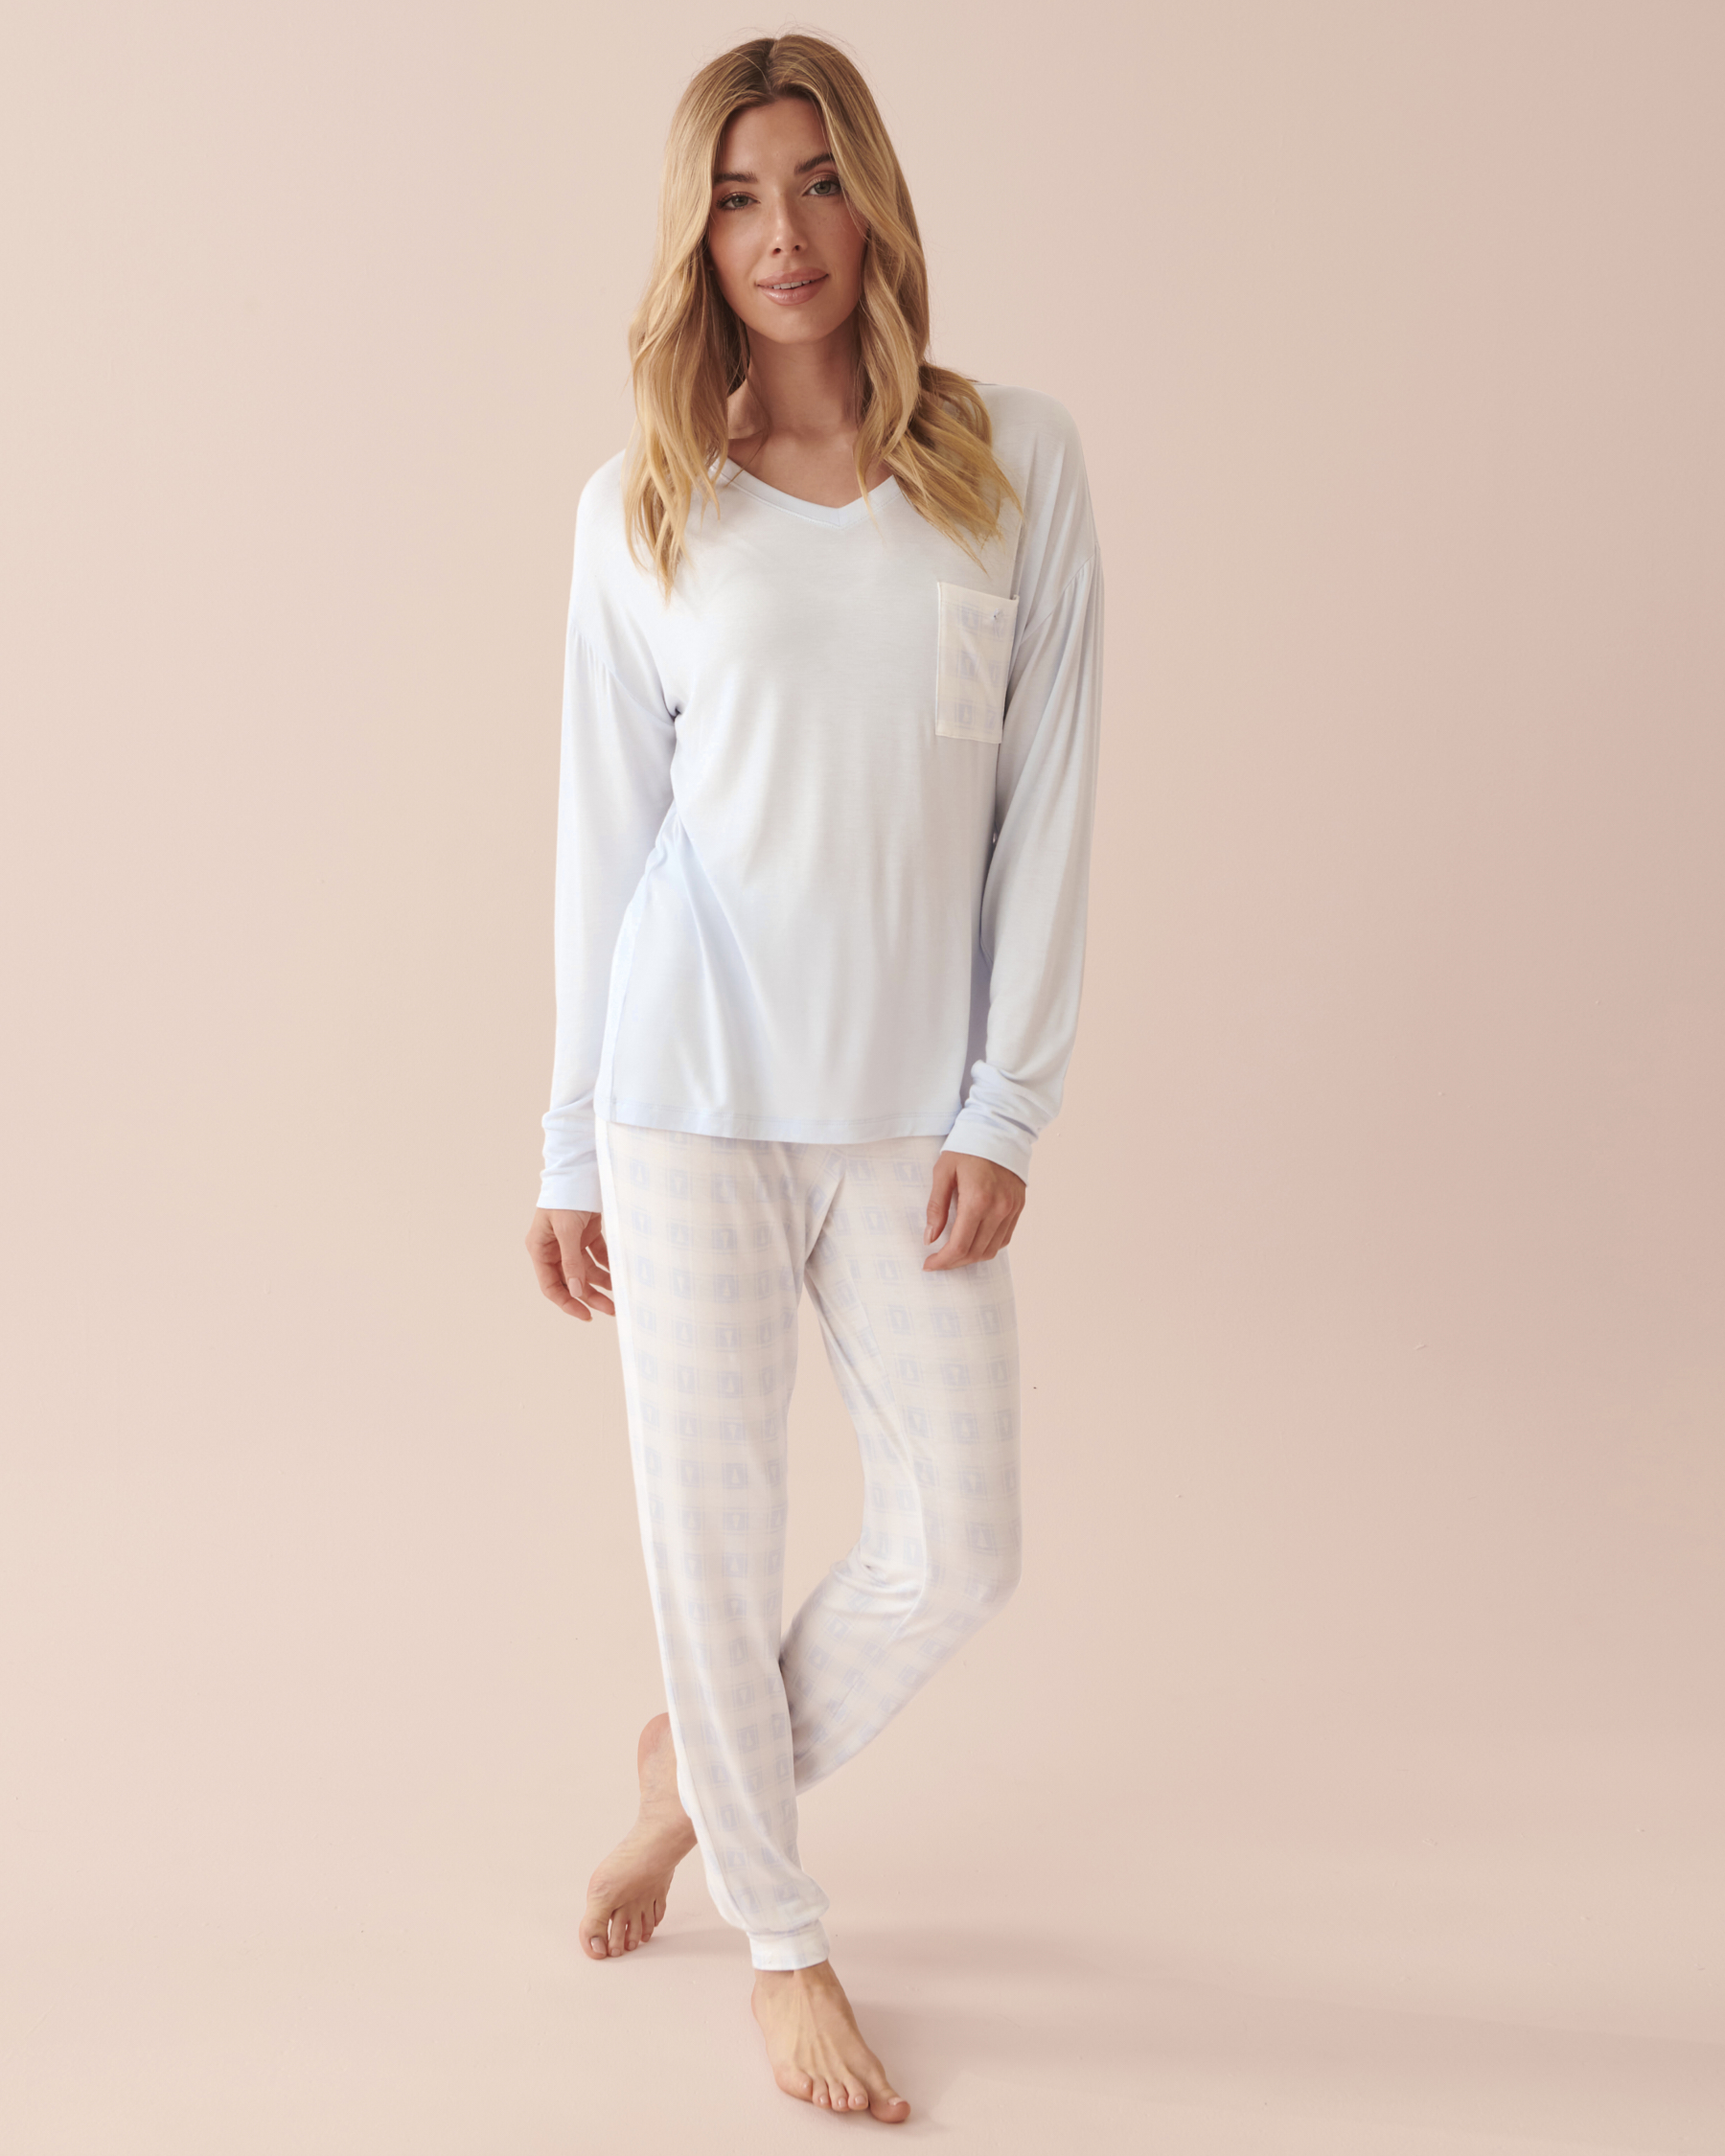 Buy Pajamas Collection Online